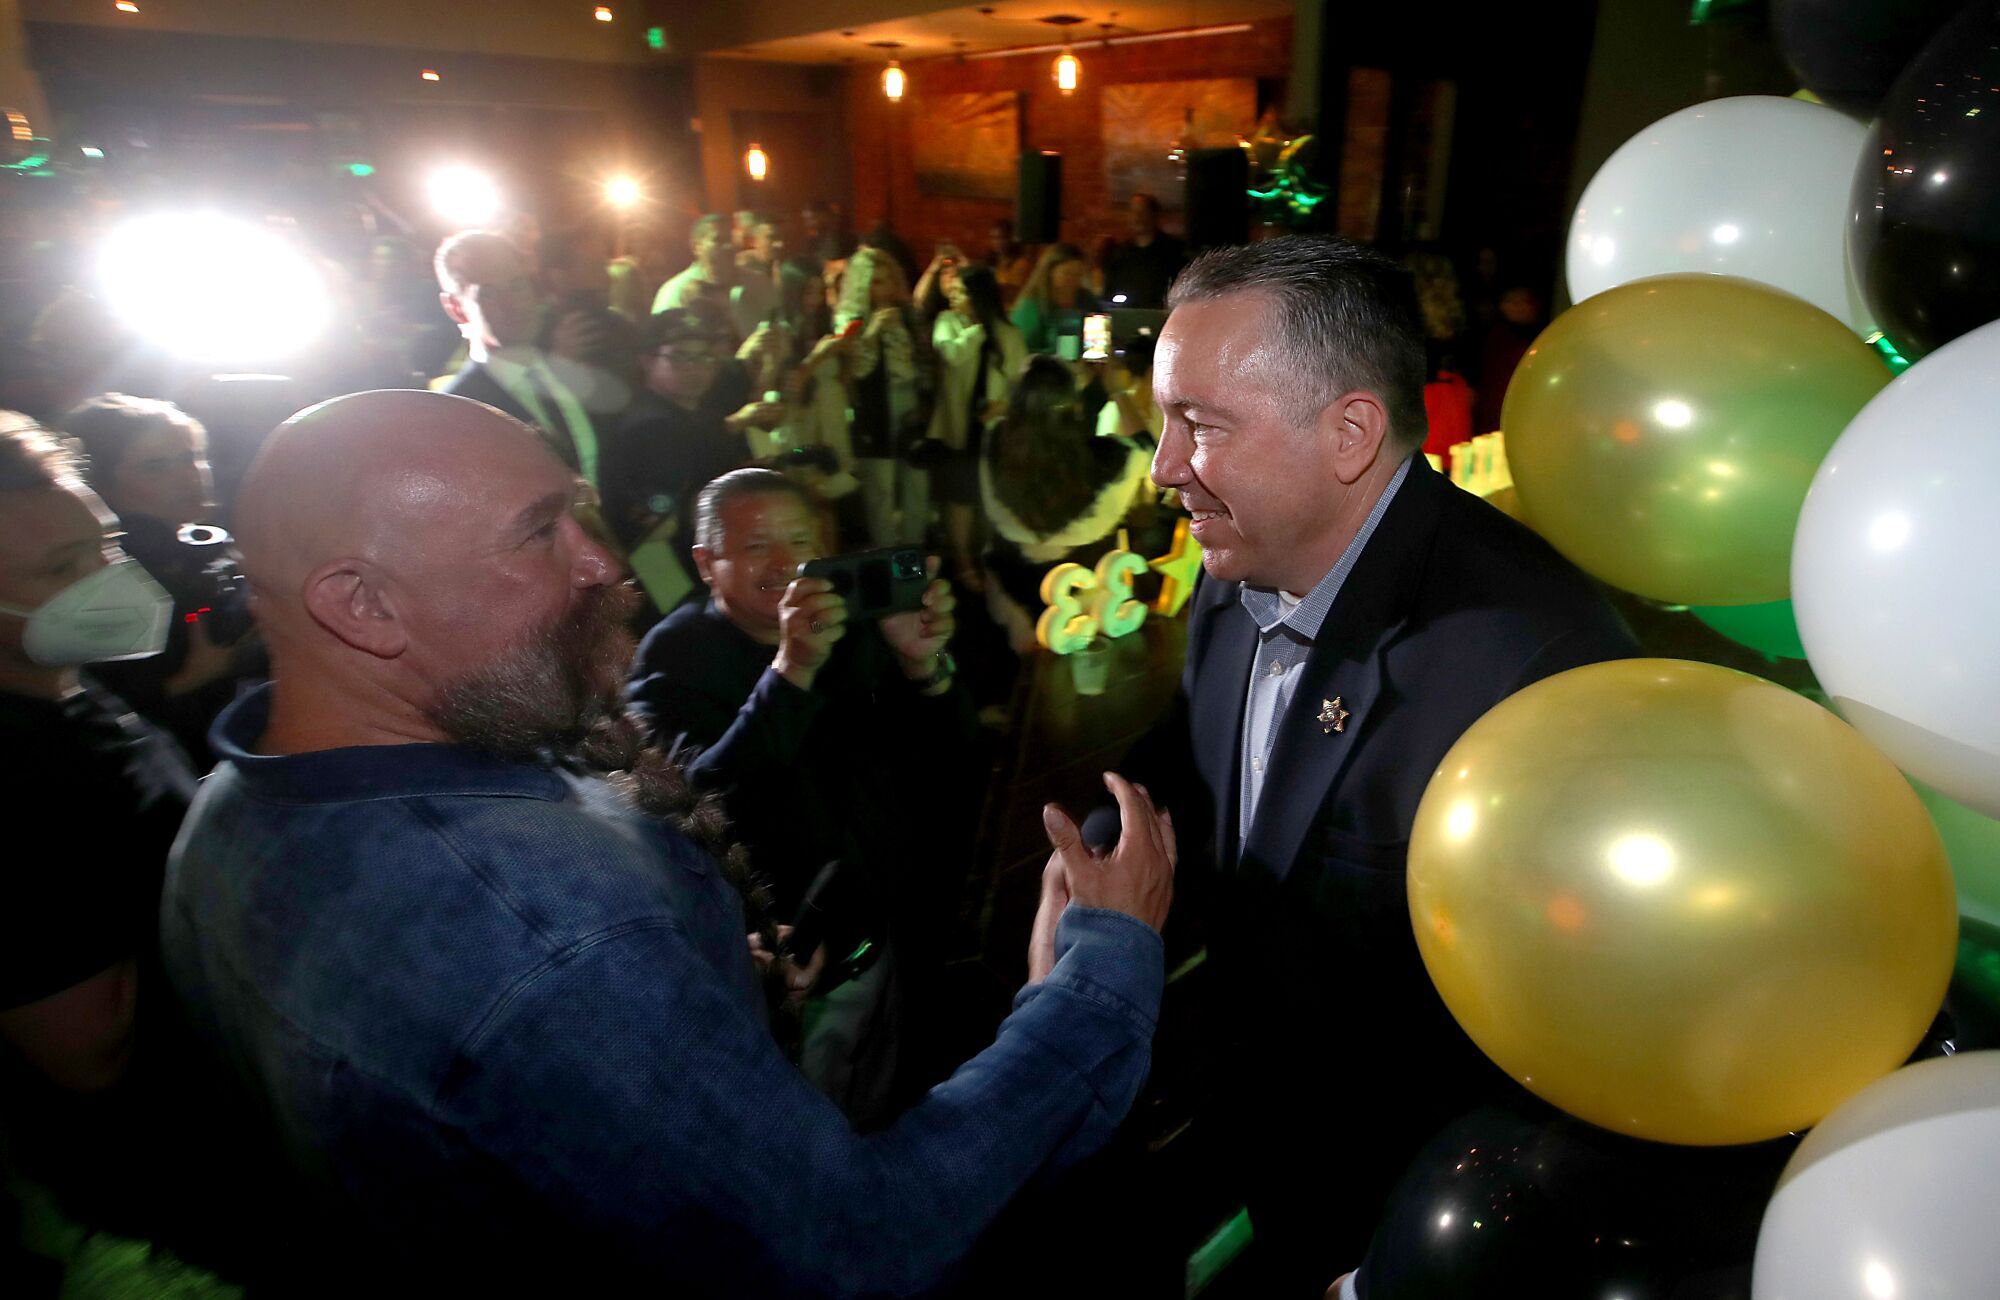 Two men greeting each other surrounded by a crowd and balloons